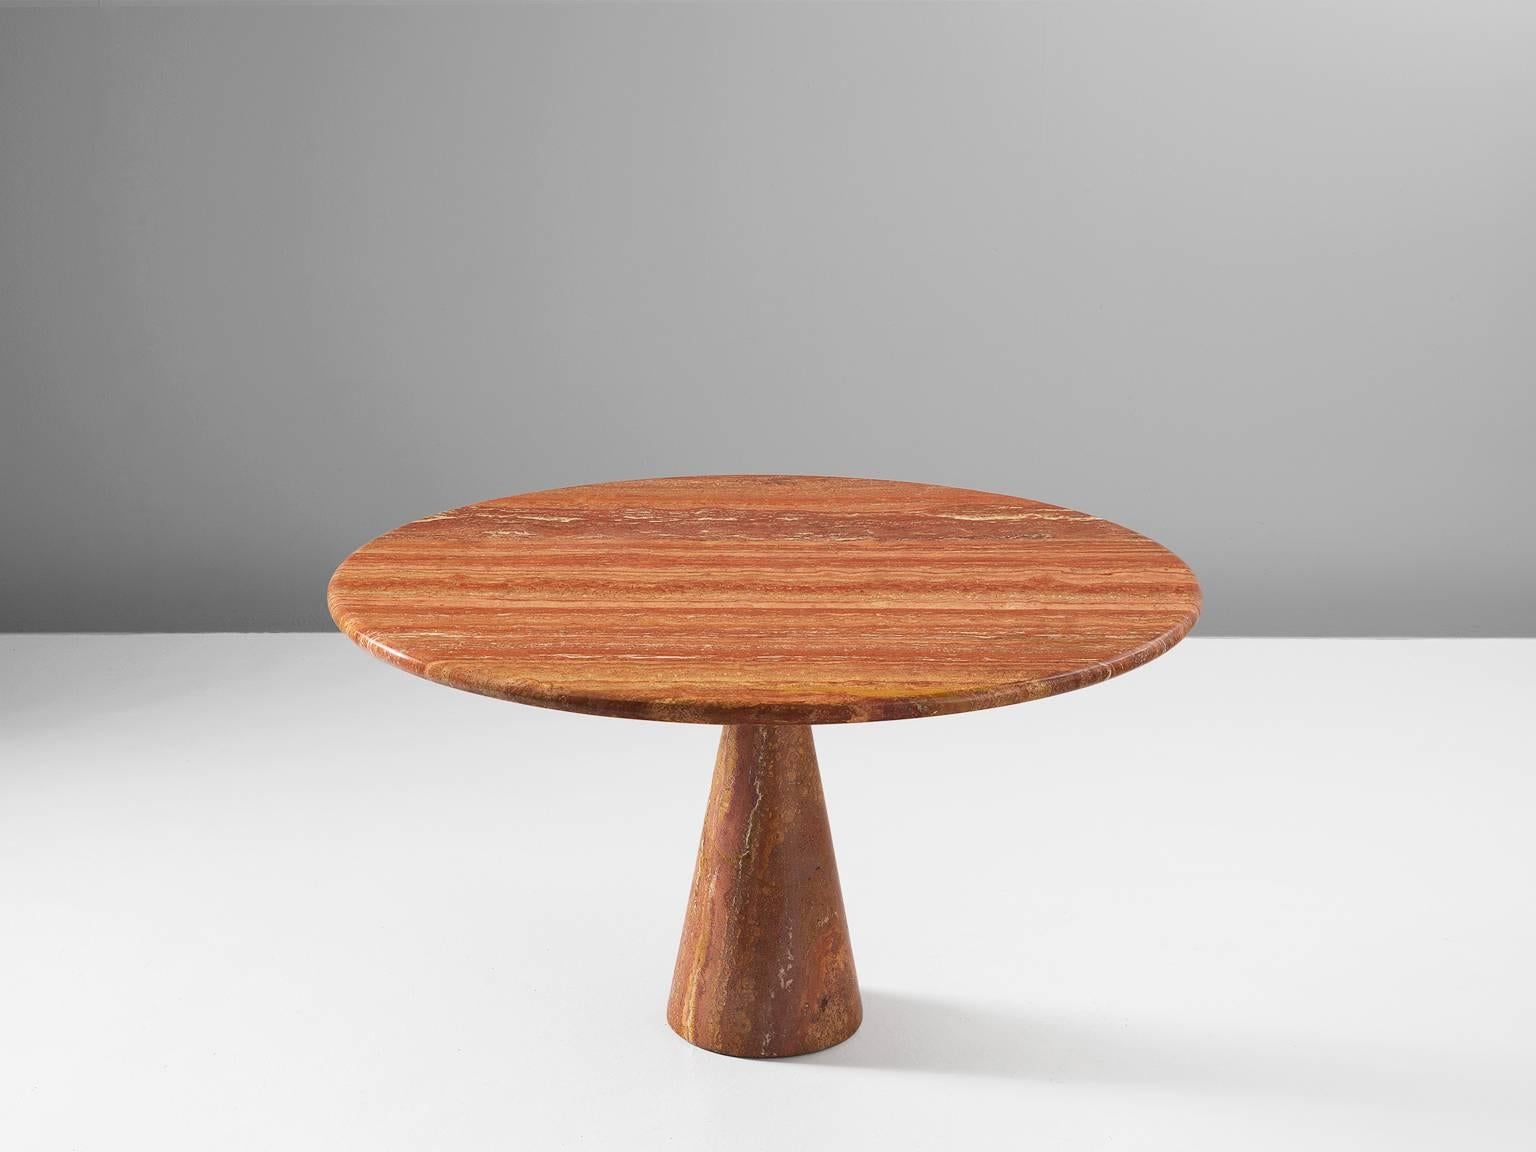 Dining table, red travertine, 1969 by Angelo Mangiarotti and made by the company T70, Italy. 

Angelo Mangiarotti (1921-2012) was an Italian architect and Industrial designer with a reputation to mainly focus on the needs of the users of furniture.